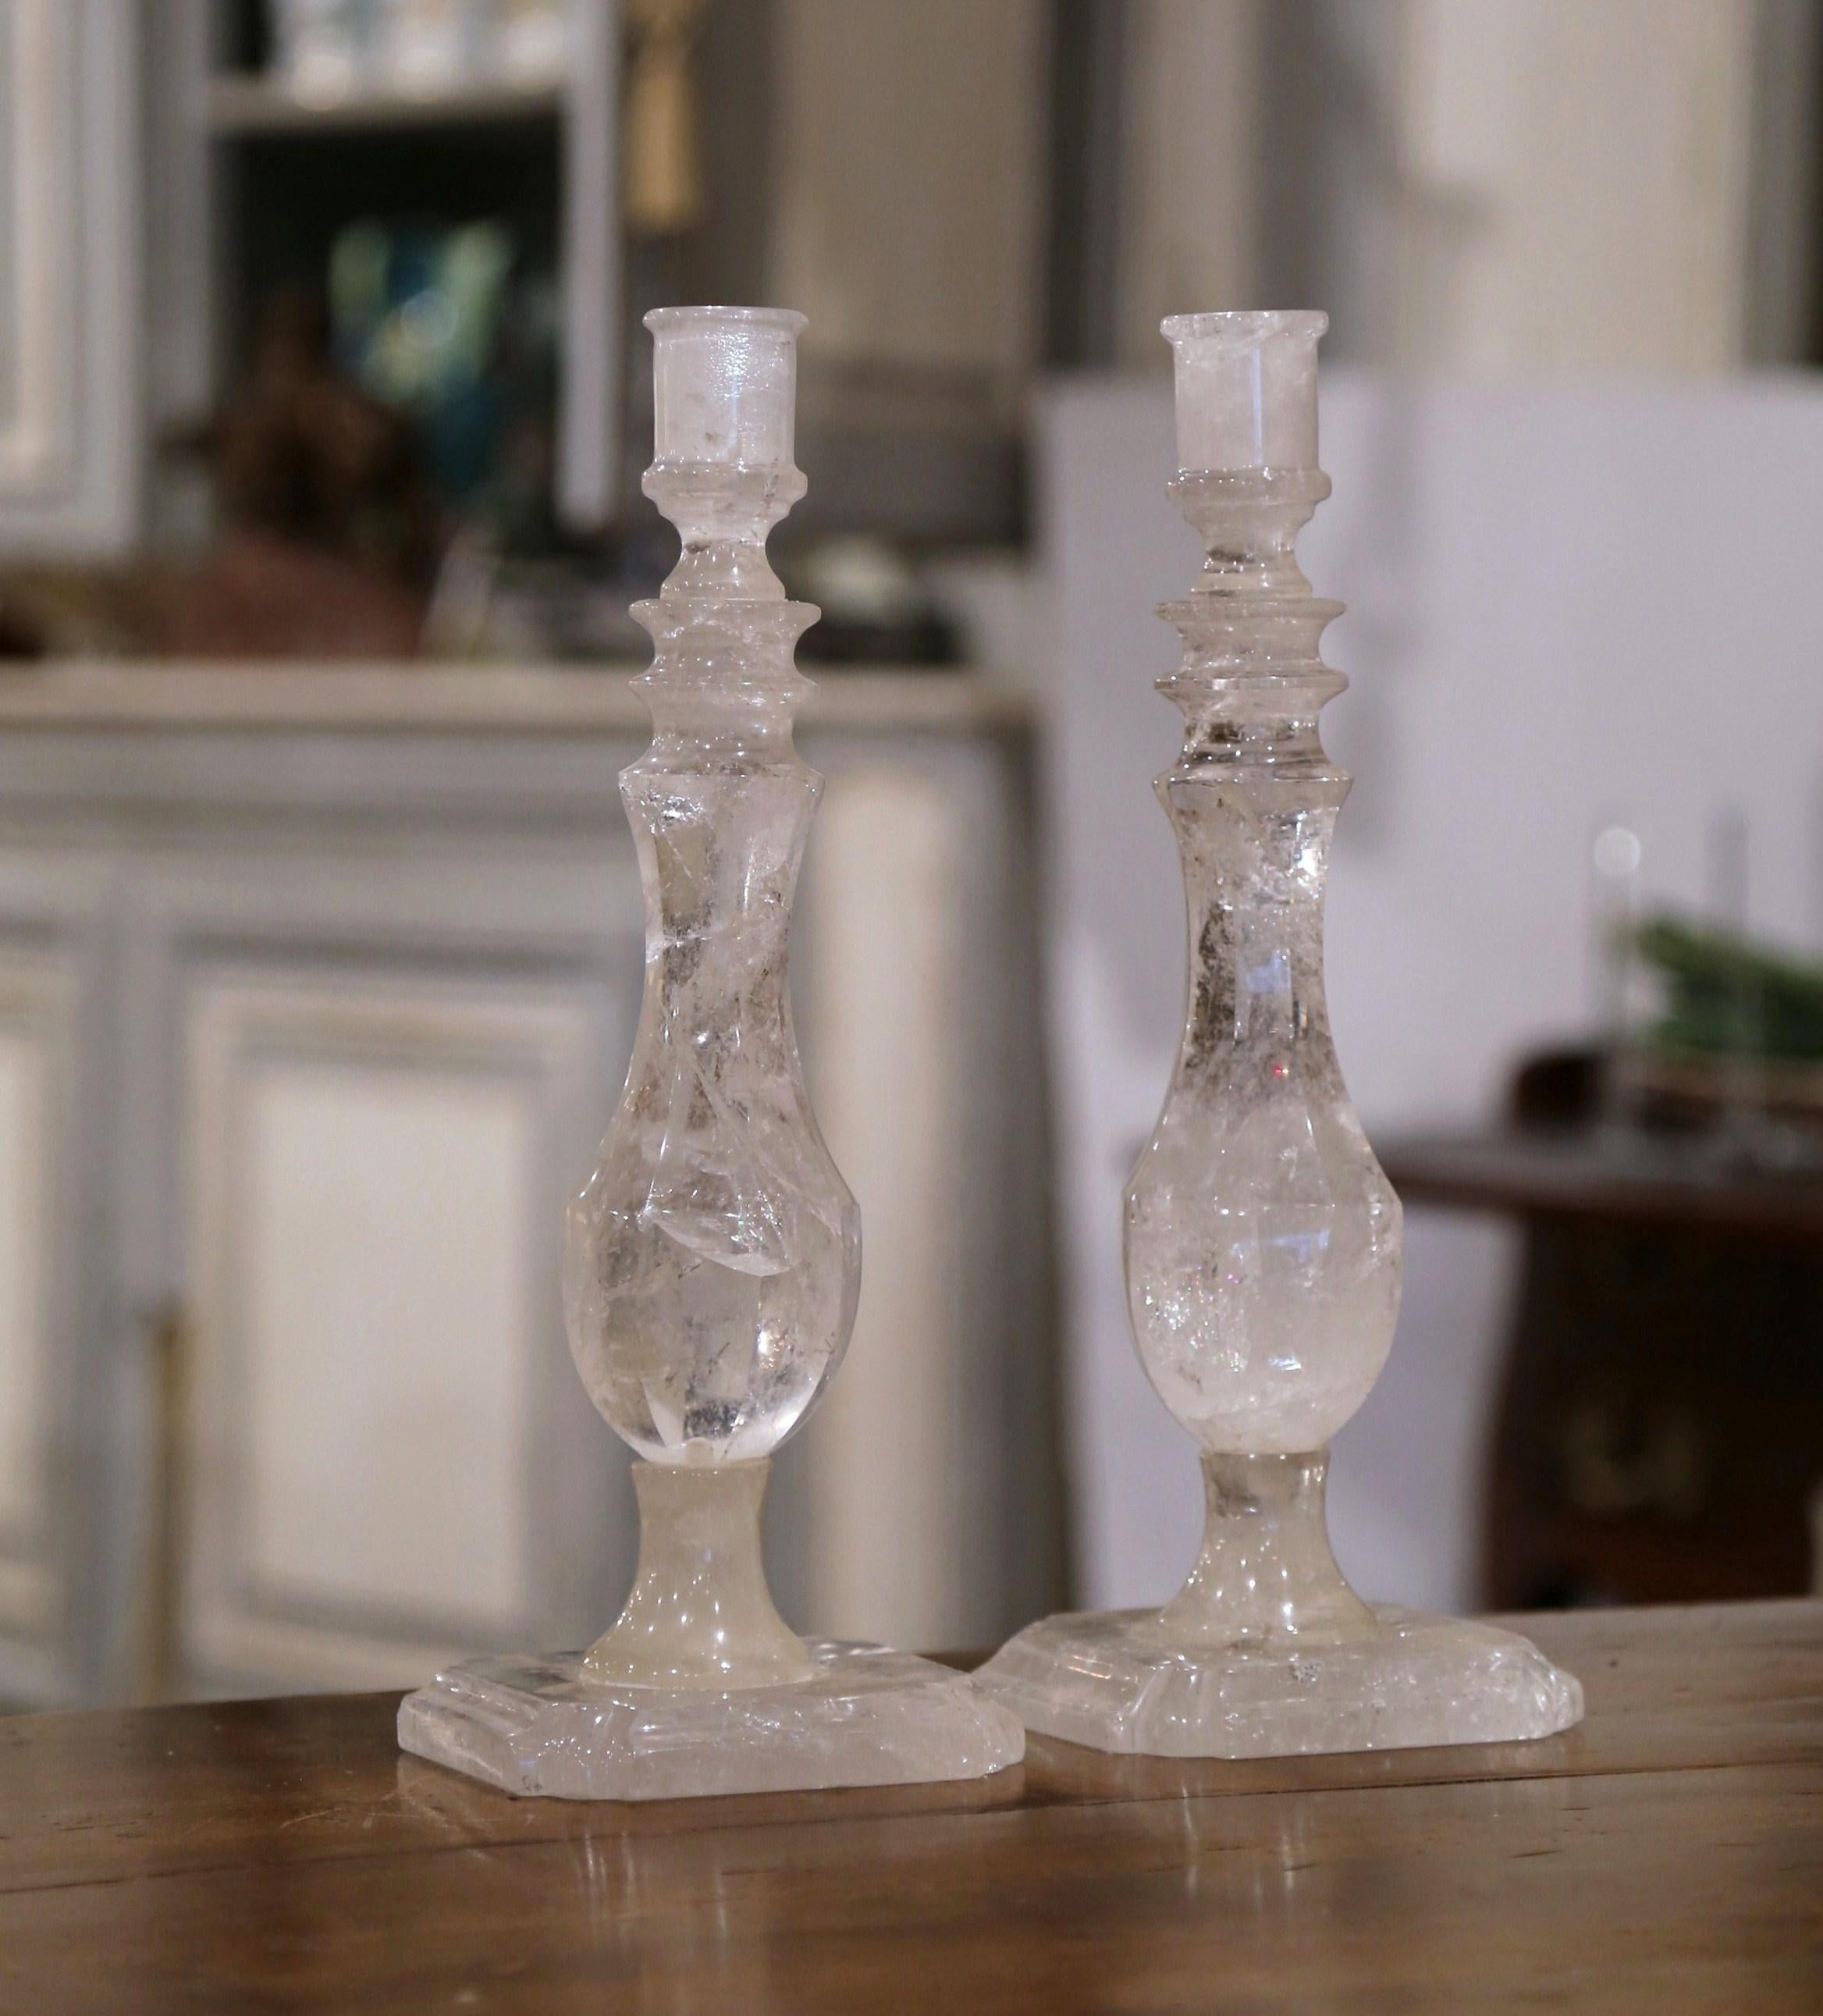 This elegant pair of rock crystal candlesticks was crafted in Brazil. Each candleholder sits on a sturdy, square base and features exquisite craftsmanship throughout. The candlesticks have a carved stem with an octagonal center base. Both pieces are